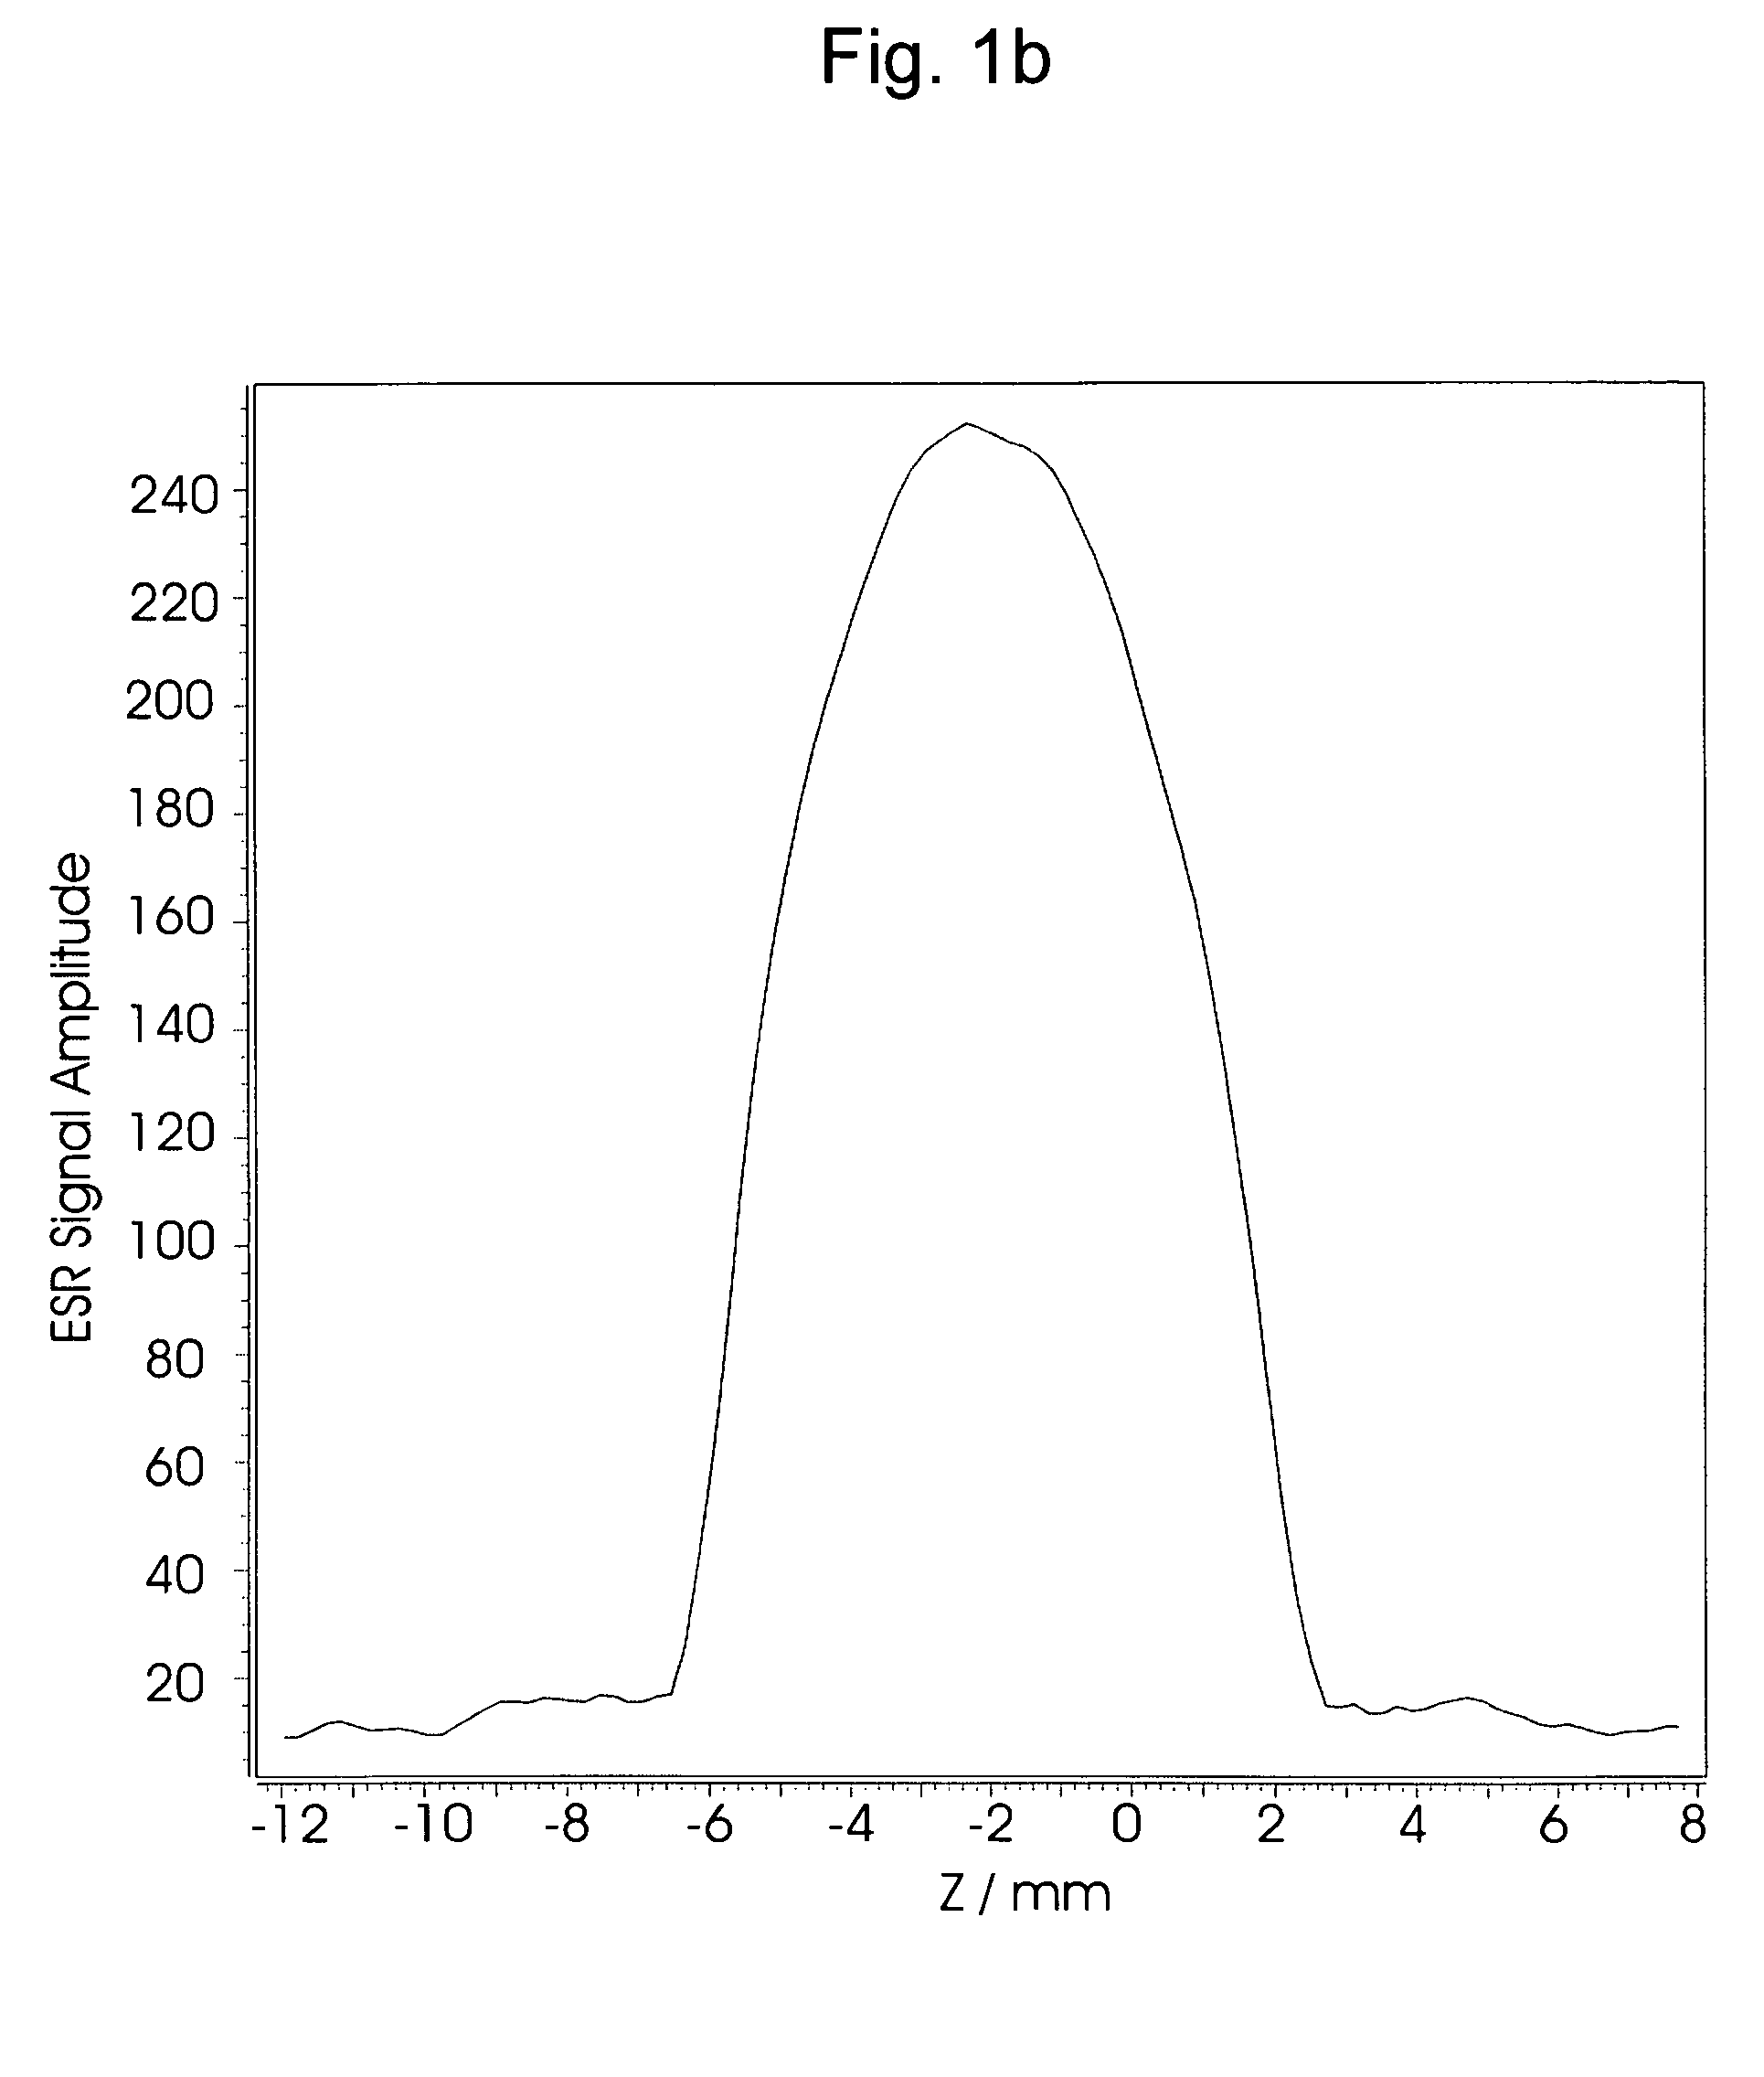 Method for determining the absolute number of electron spins in a sample of extended size